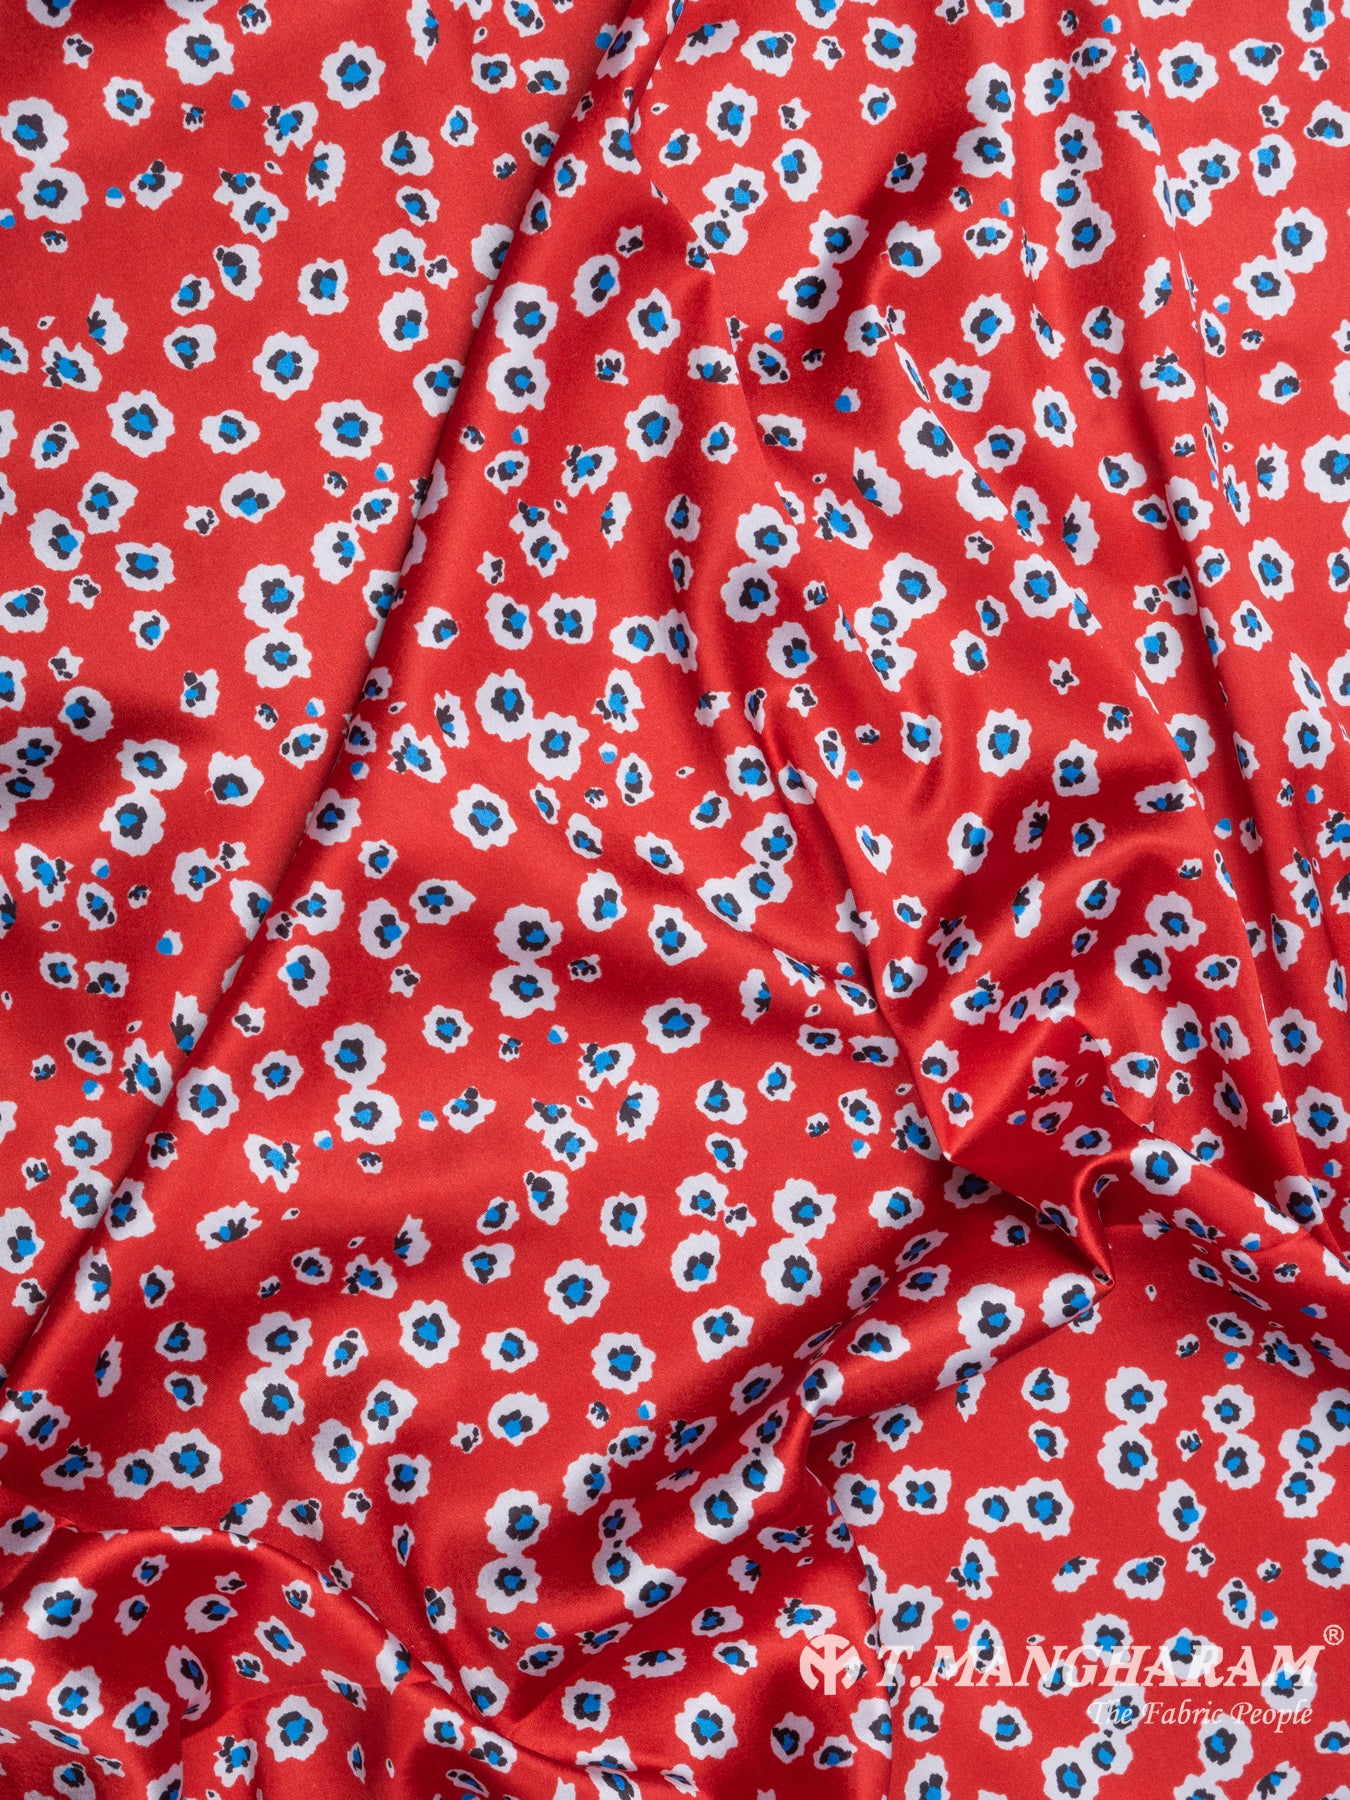 Red Modal Satin Fabric - EB5416 view-4